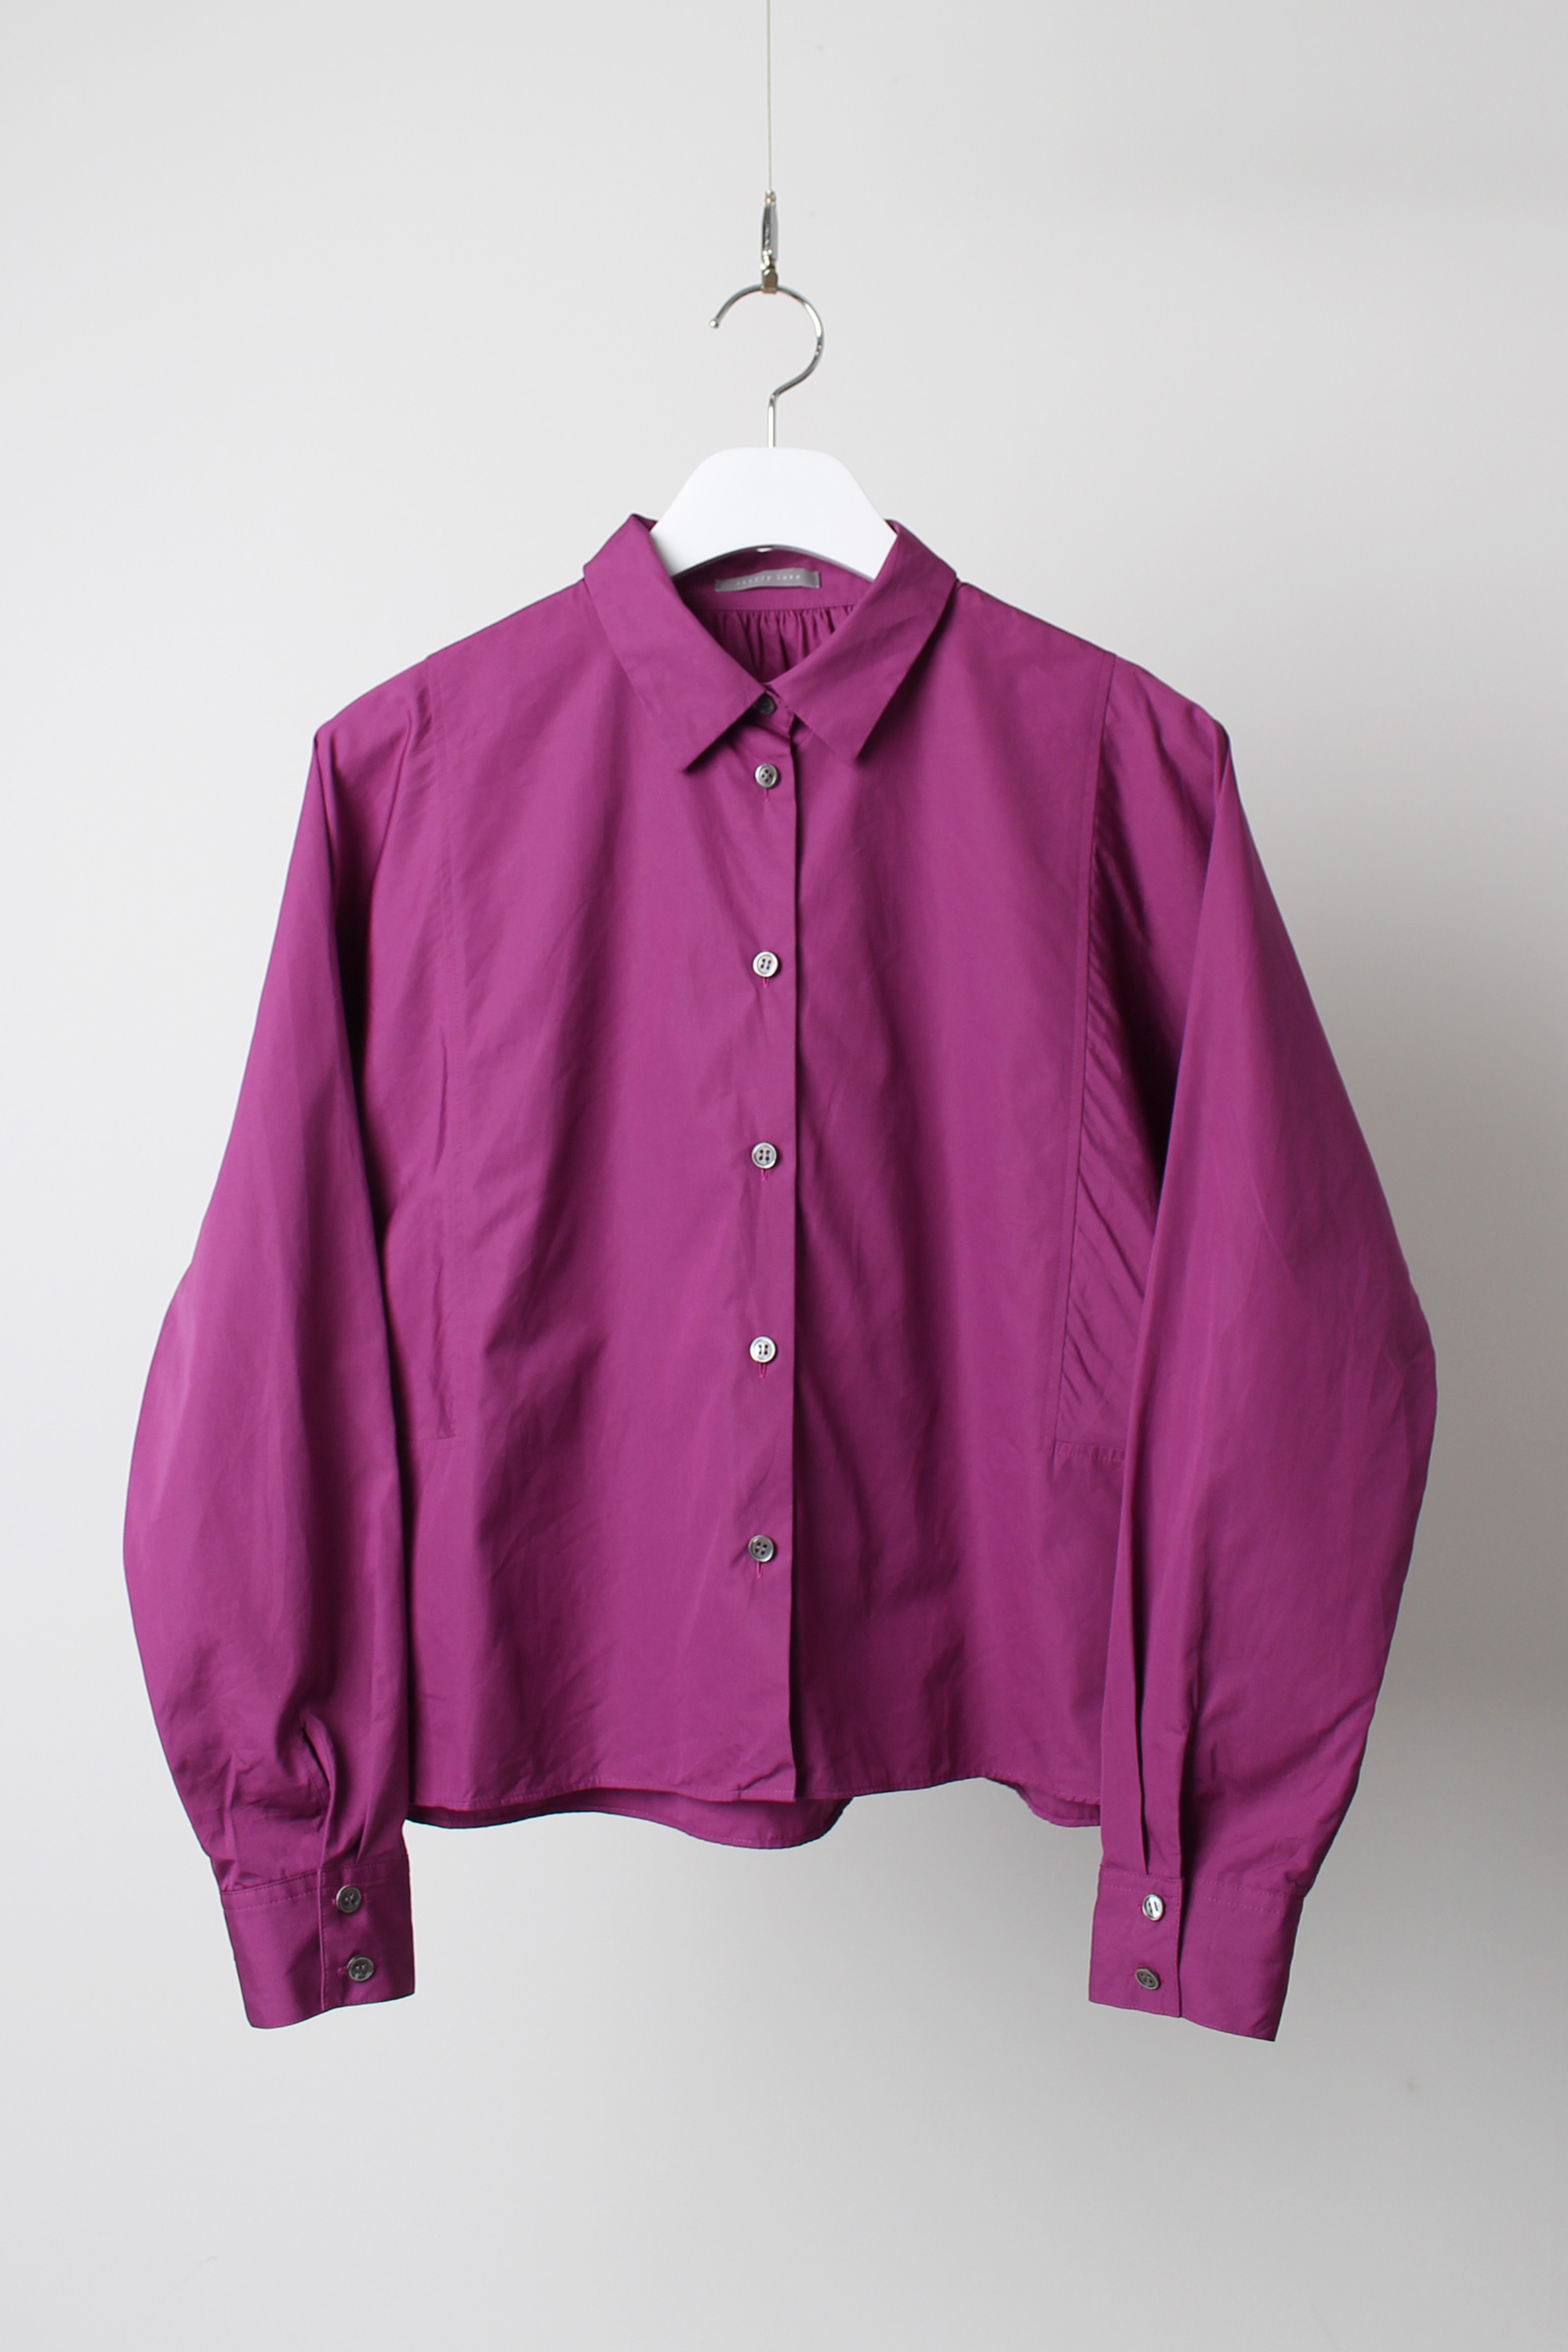 Theory luxe shirt